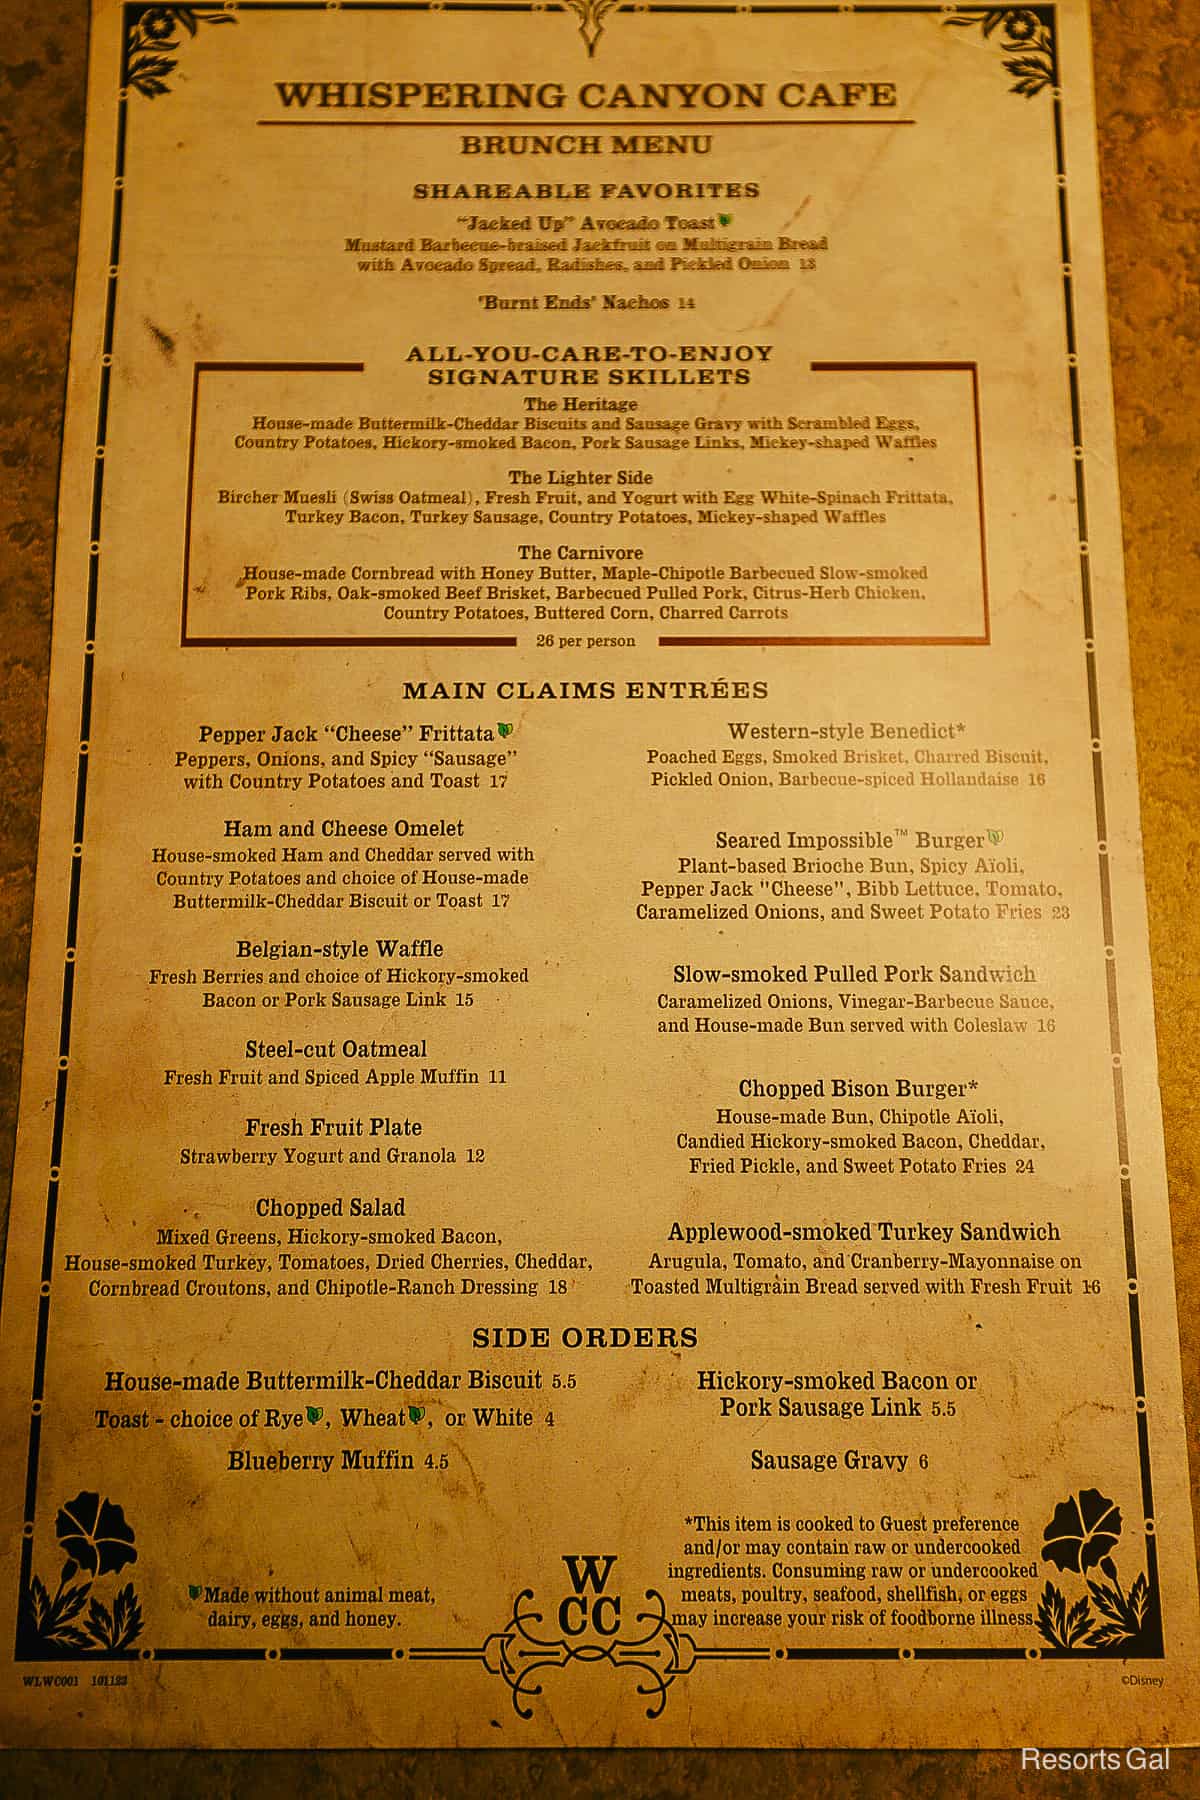 the brunch menu (breakfast and lunch) for Whispering Canyon Cafe